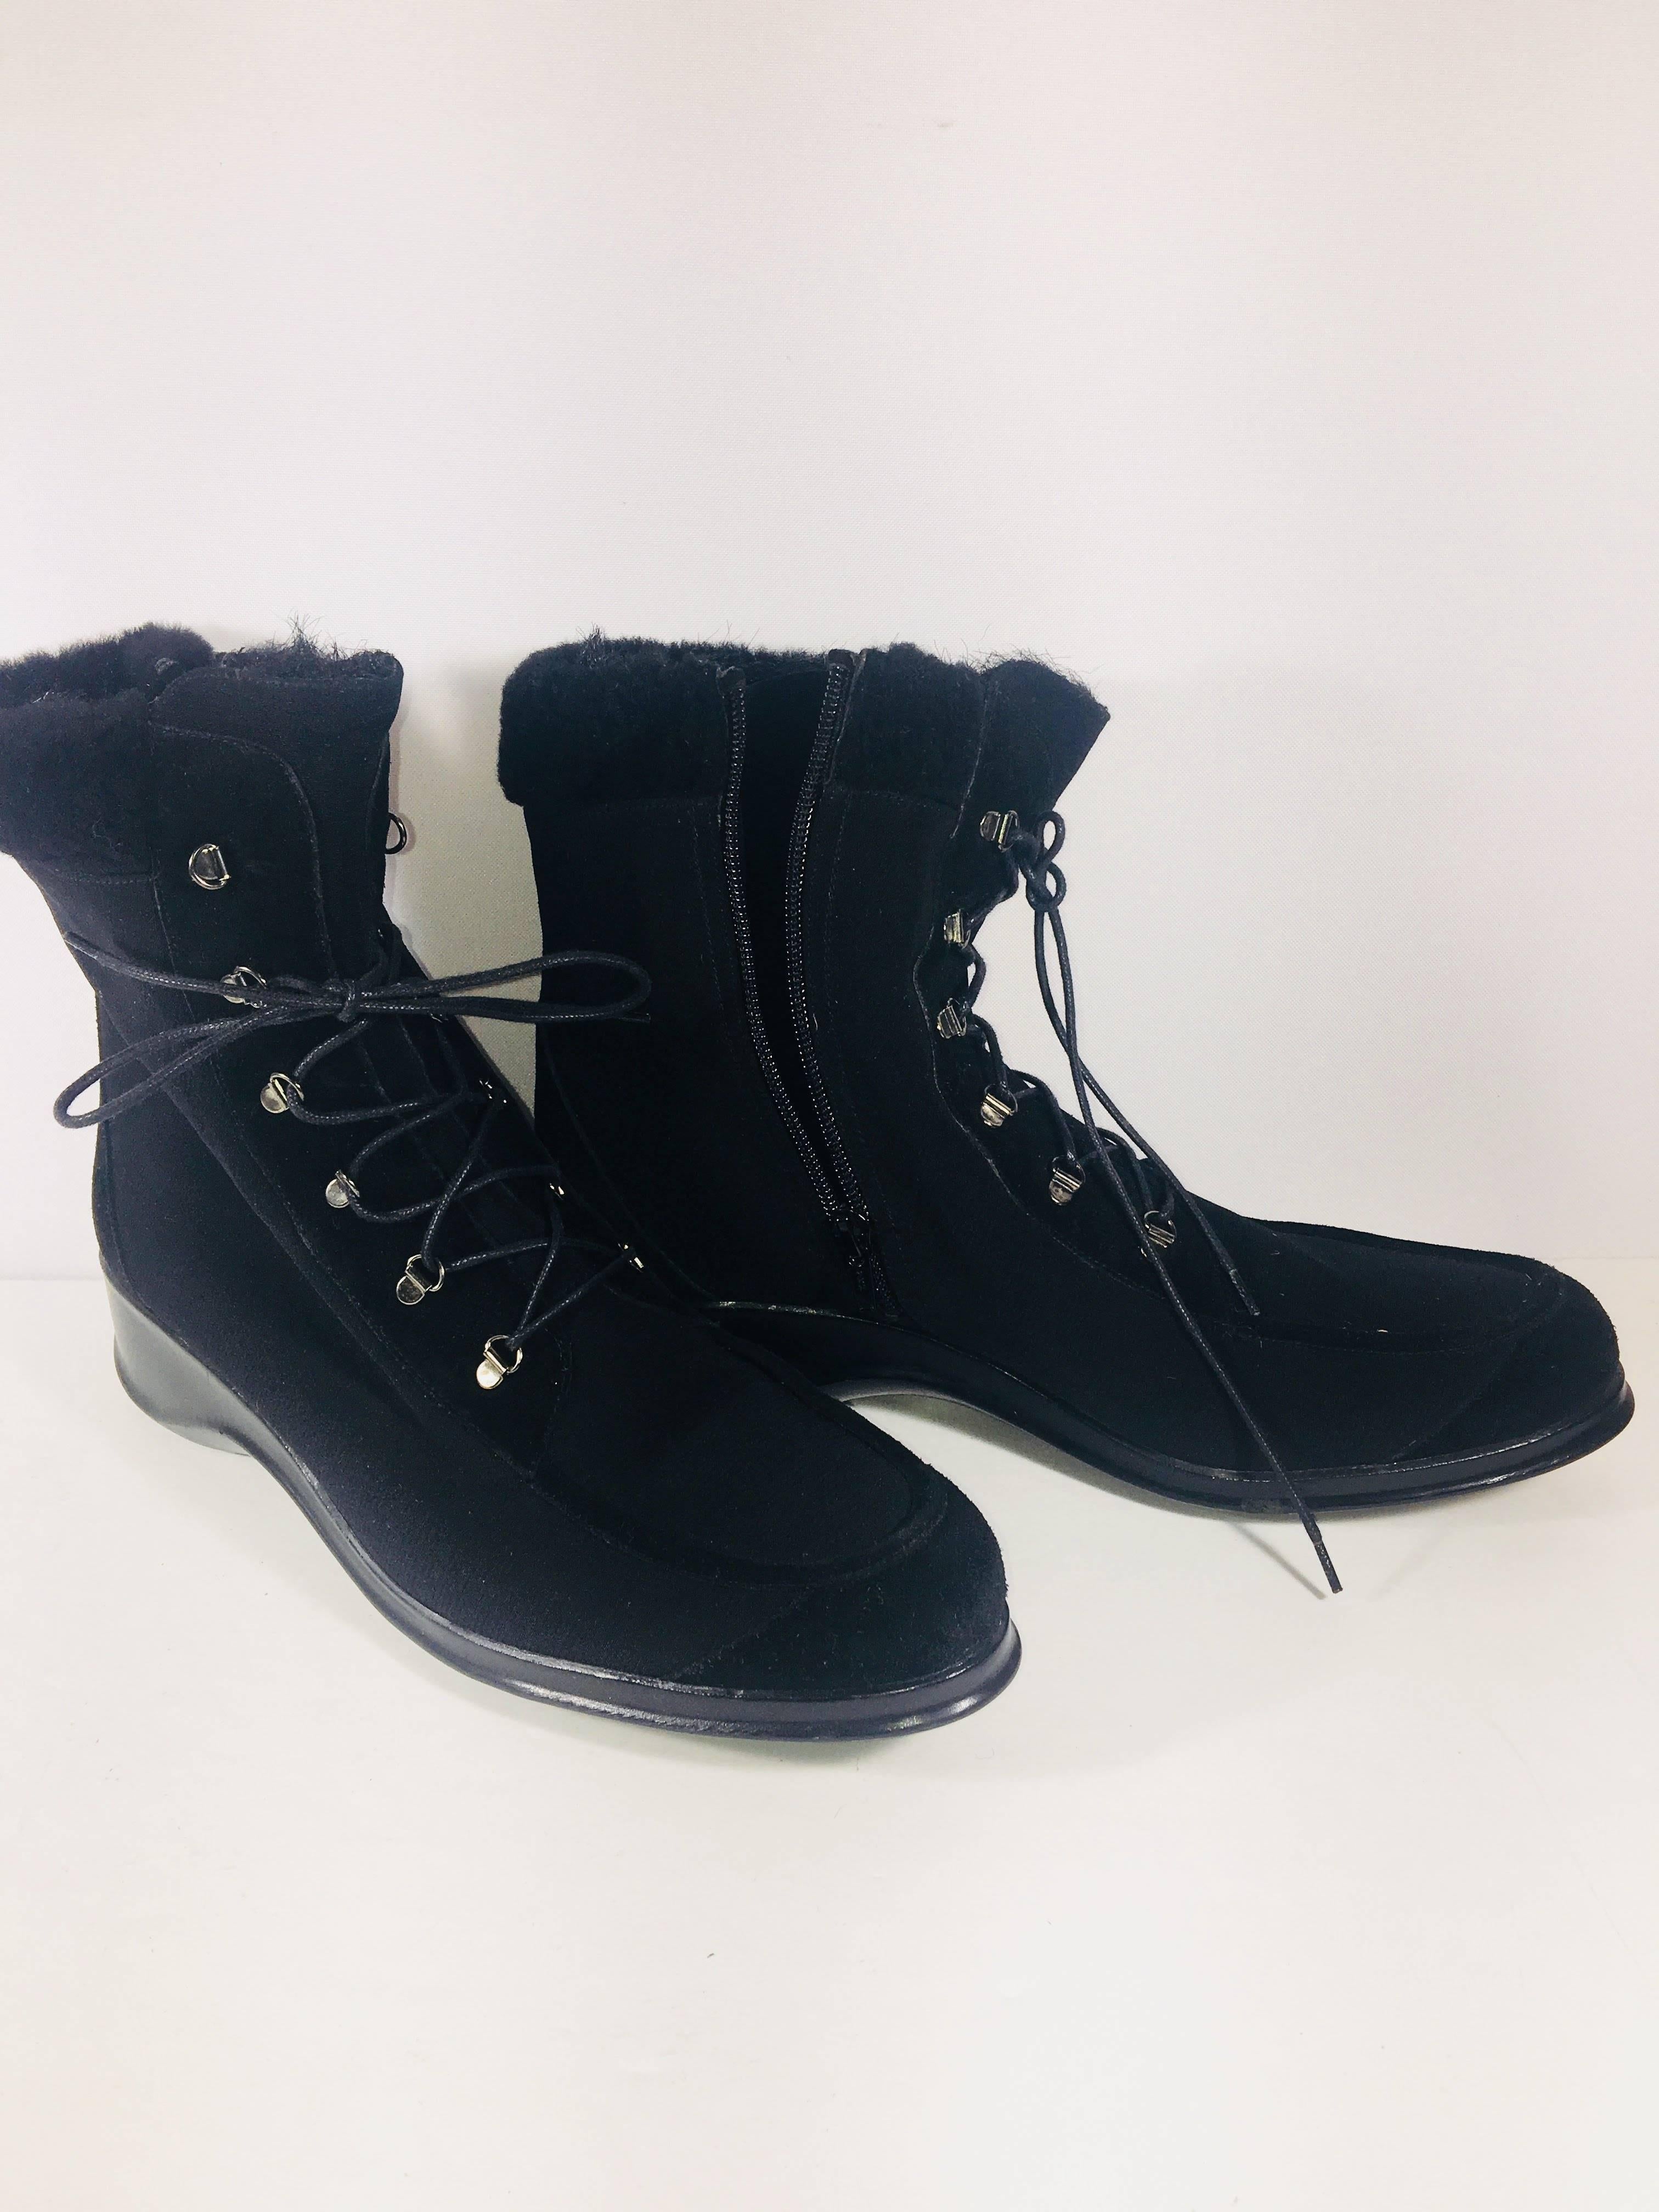 Stuart Weitzman Wedge Ankle Boots in Black Suede in Size 10. Lace Up and Zip Sides.